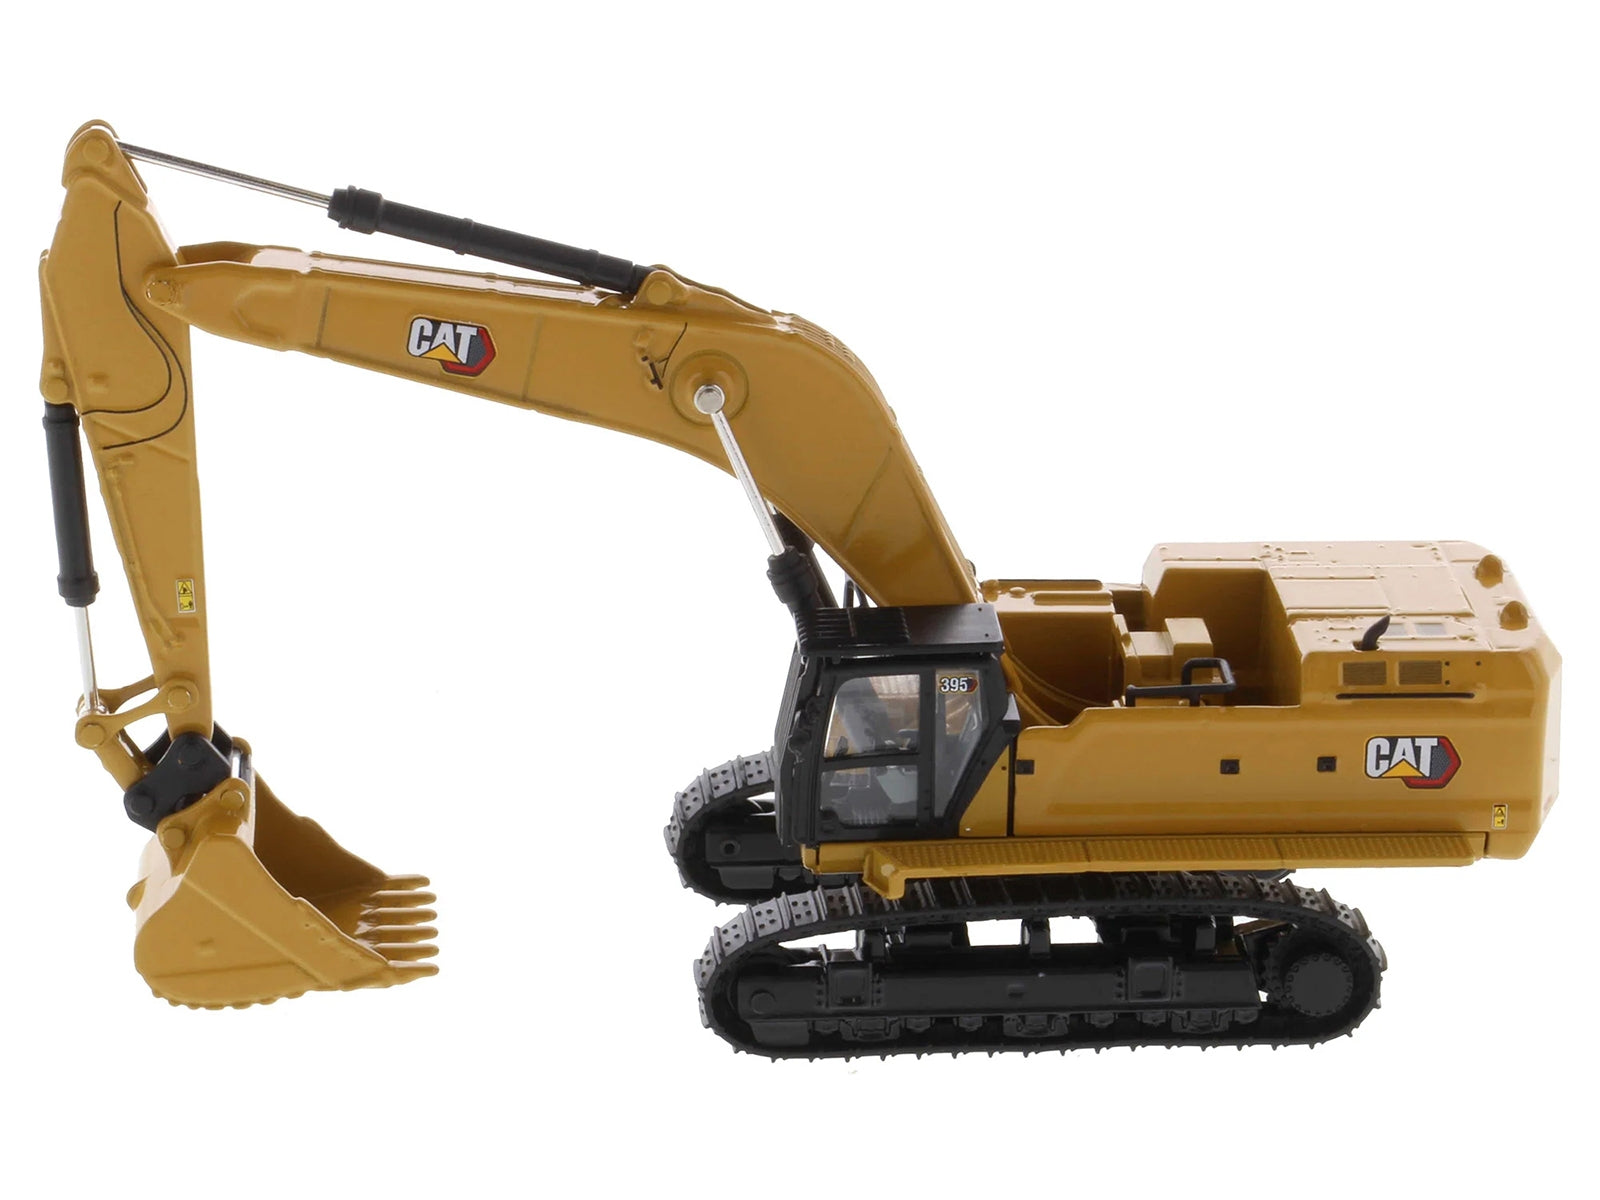 CAT Caterpillar 395 Next-Generation Hydraulic Excavator (General Purpose Version) Yellow with Additional Tools "High Line Series" 1/87 (HO) Diecast Model by Diecast Masters Diecast Masters